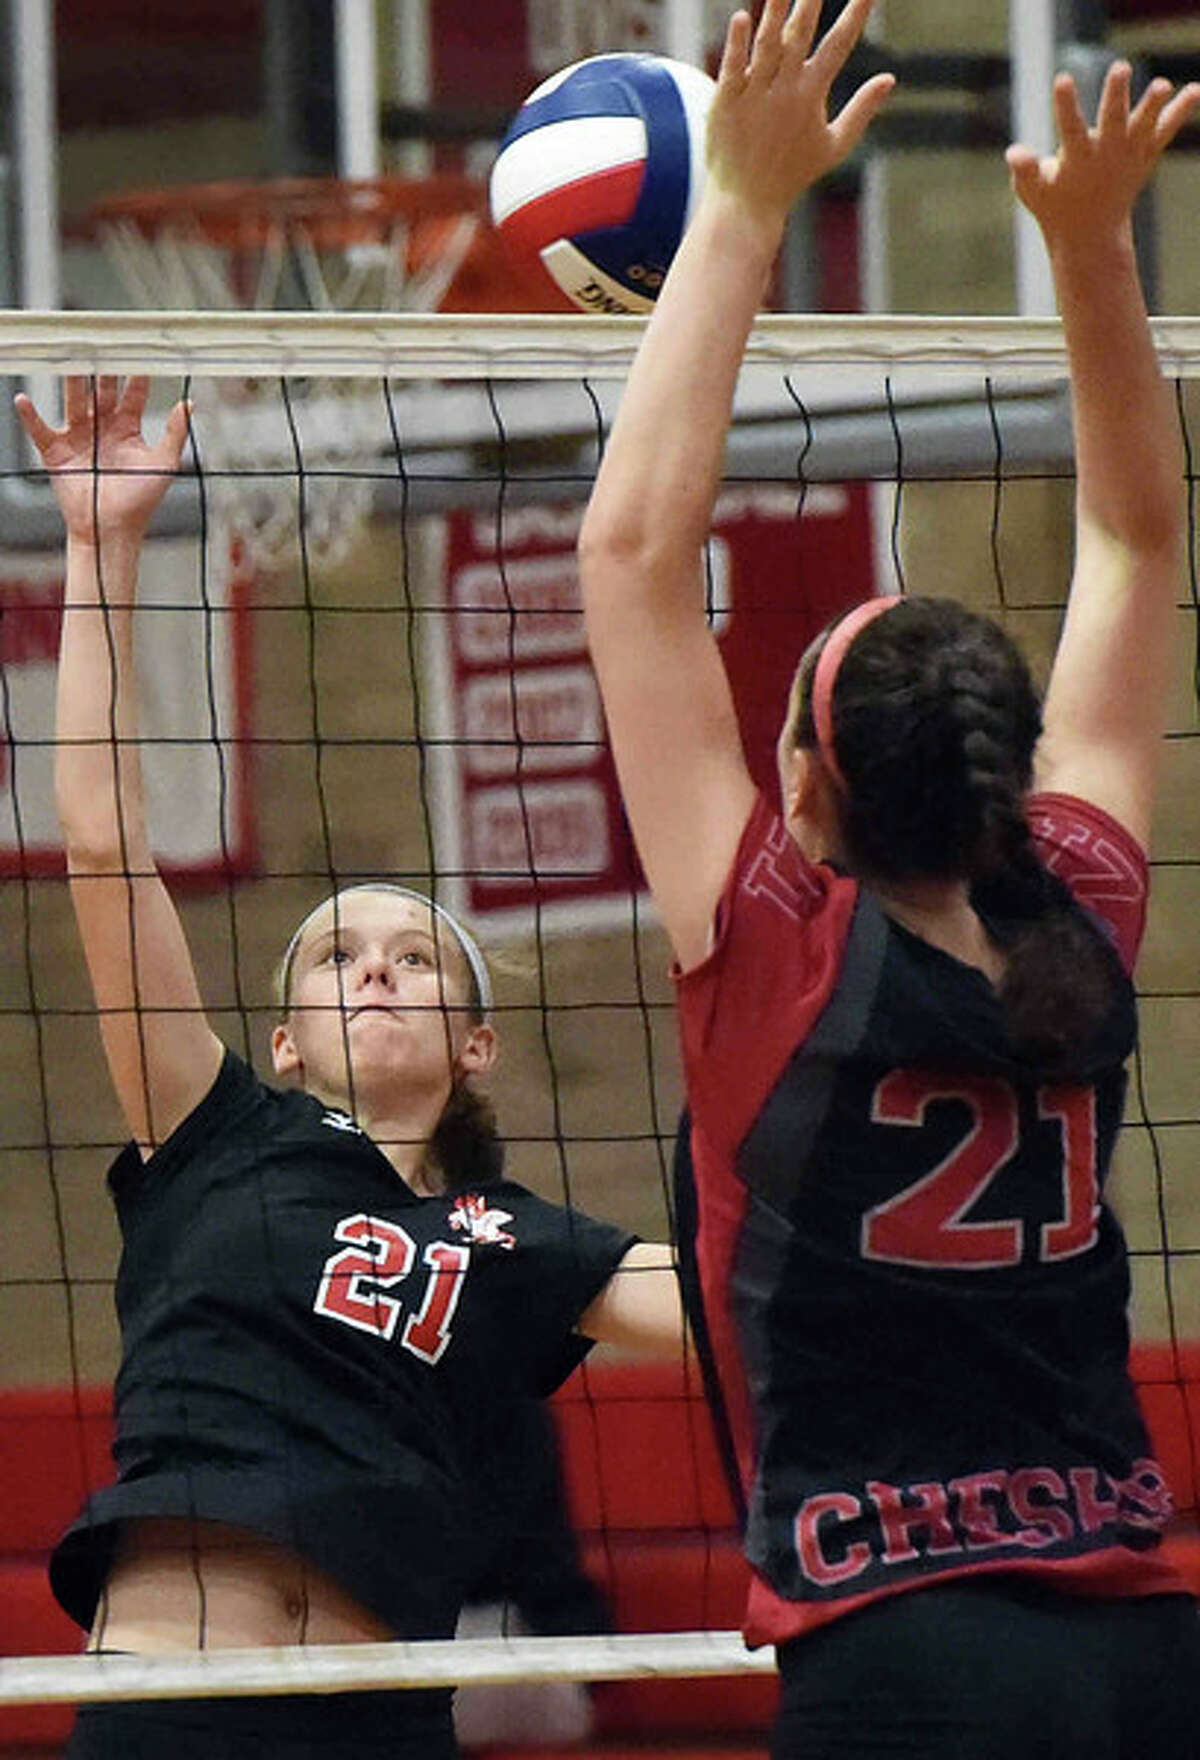 Marissa Minore of Branford H.S., left, has her shot blocked by Jill Howard of Cheshire H.S. during girls volleyball action at Cheshire High School Wednesday, October 8, 2014. (Photo Peter Hvizdak – New Haven Register)